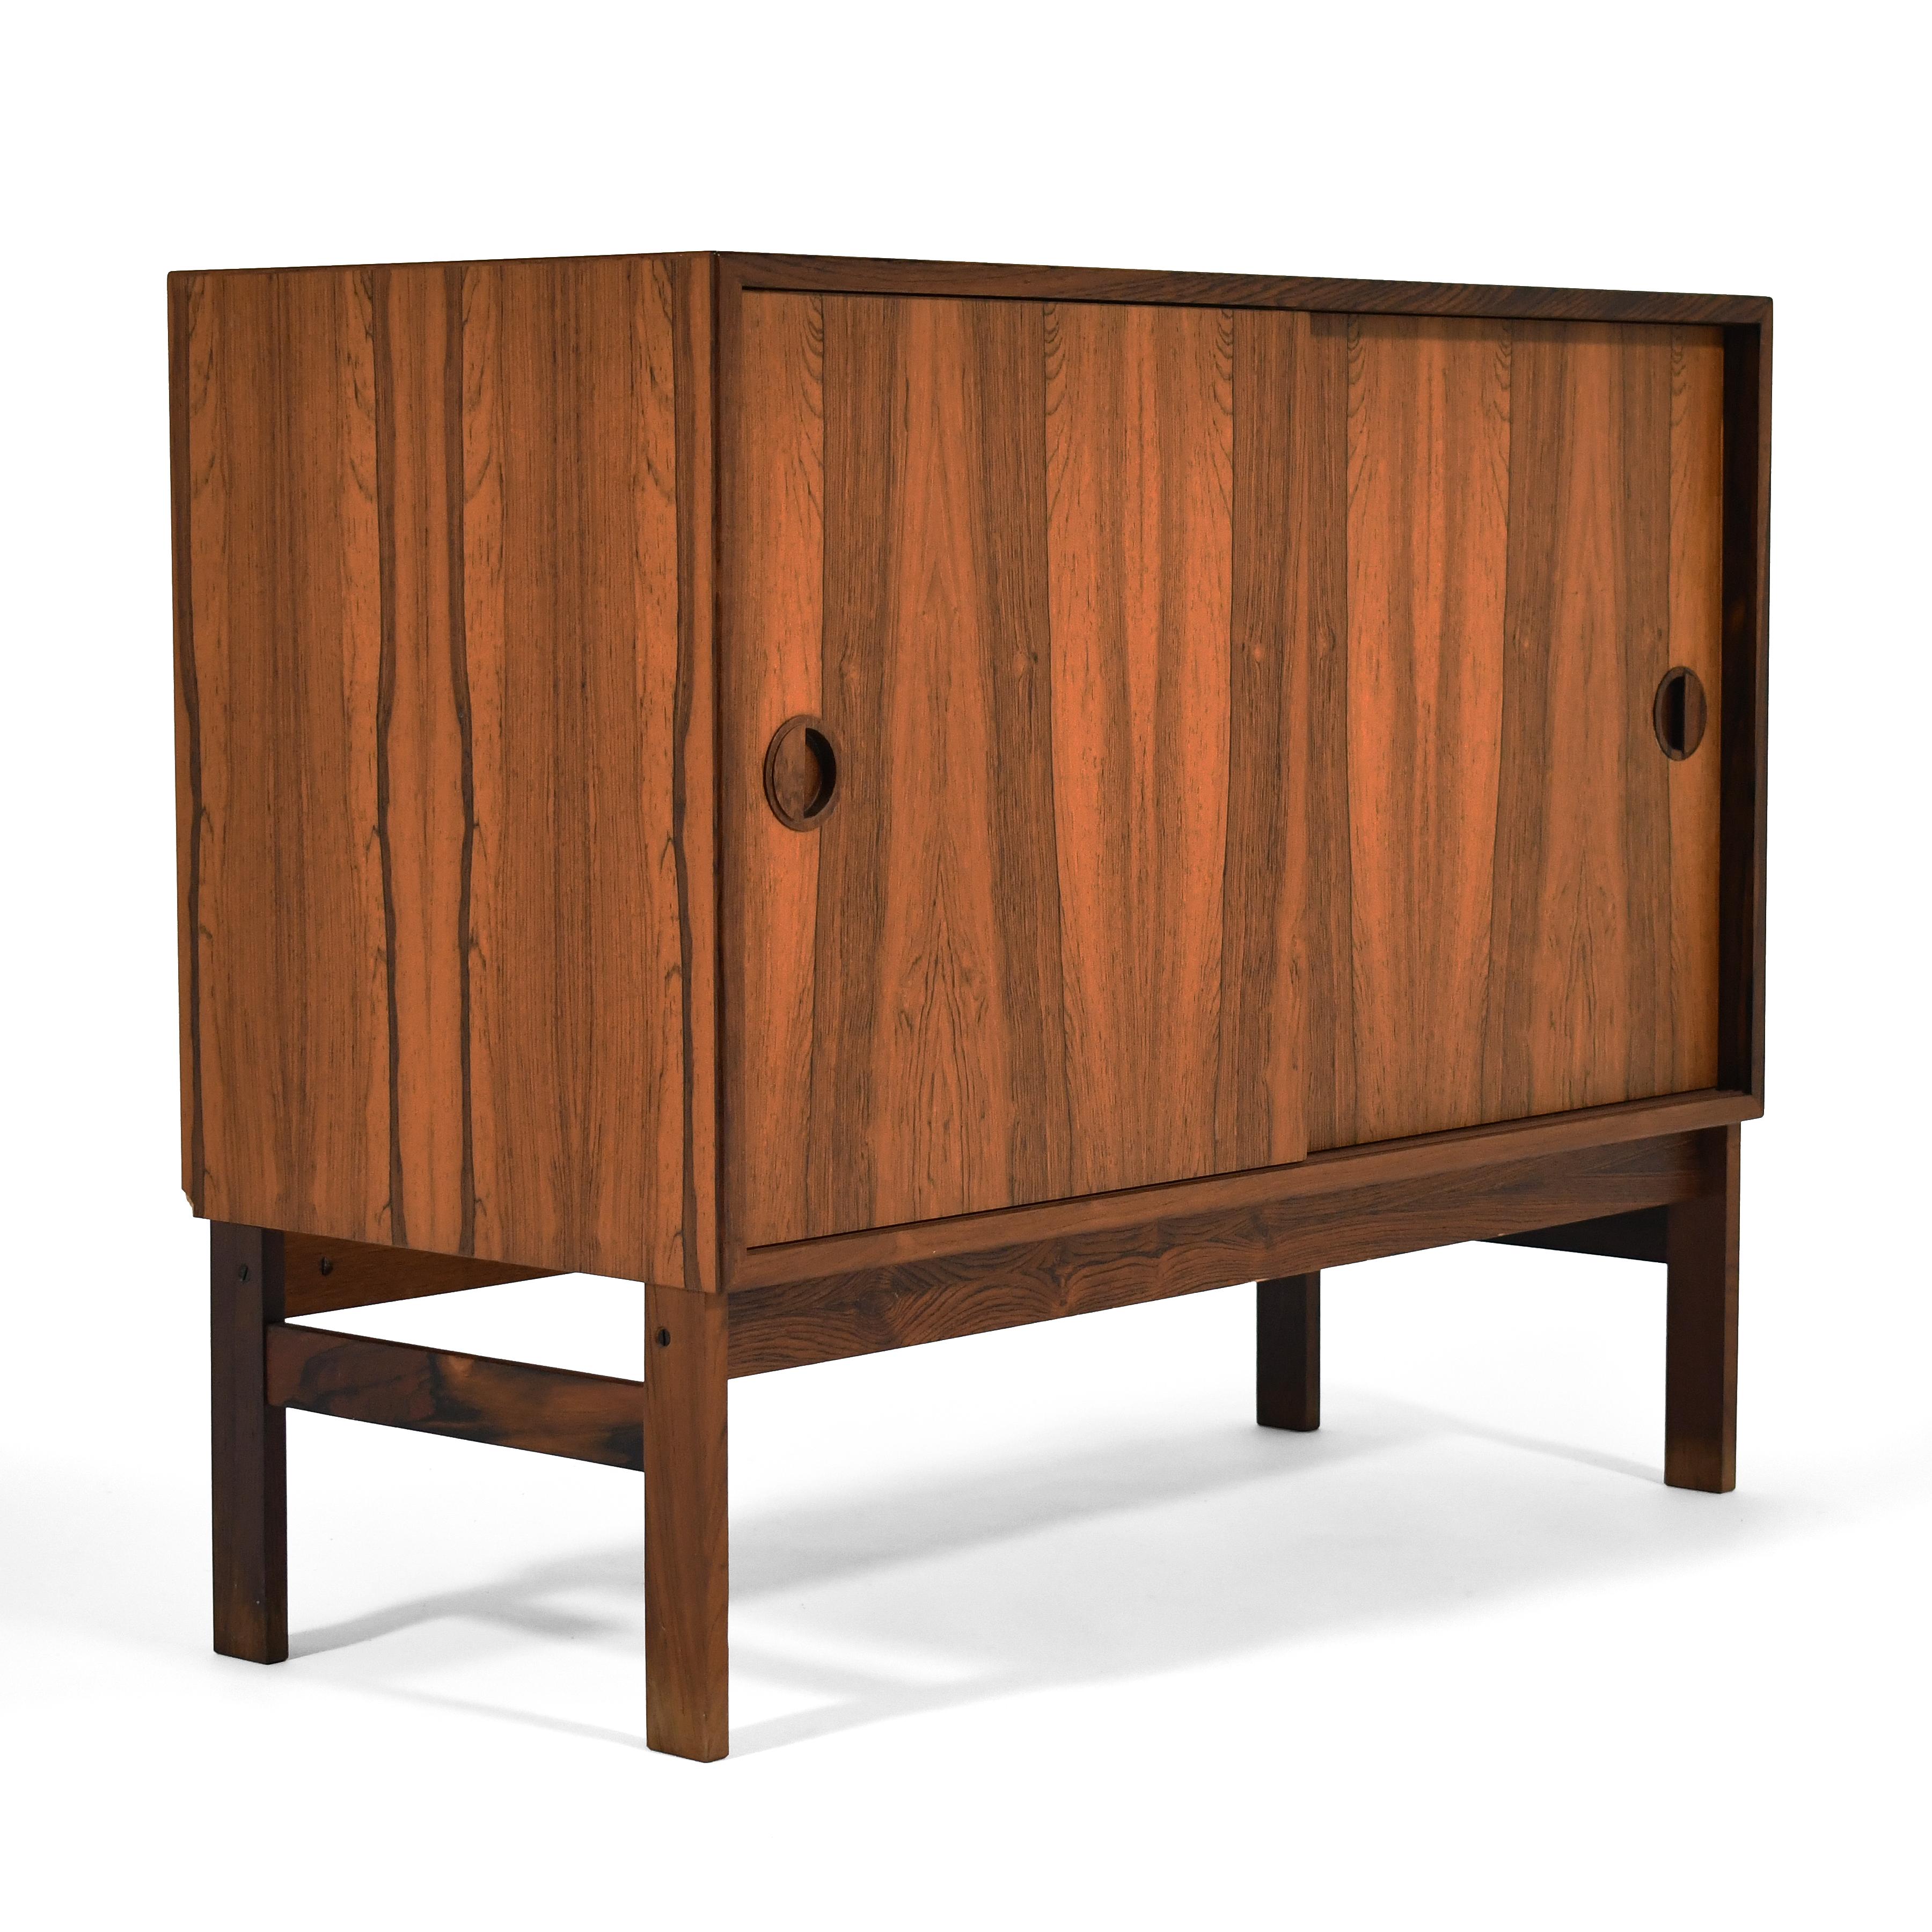 This beautiful cabinet was made in Denmark  by Hansen and Guldbord (HG Furniture). The clean-lined cabinet is clad in rosewood, and has round sculptural pulls on the sliding doors which conceal two cabinets- one with an adjustable shelf. The legs